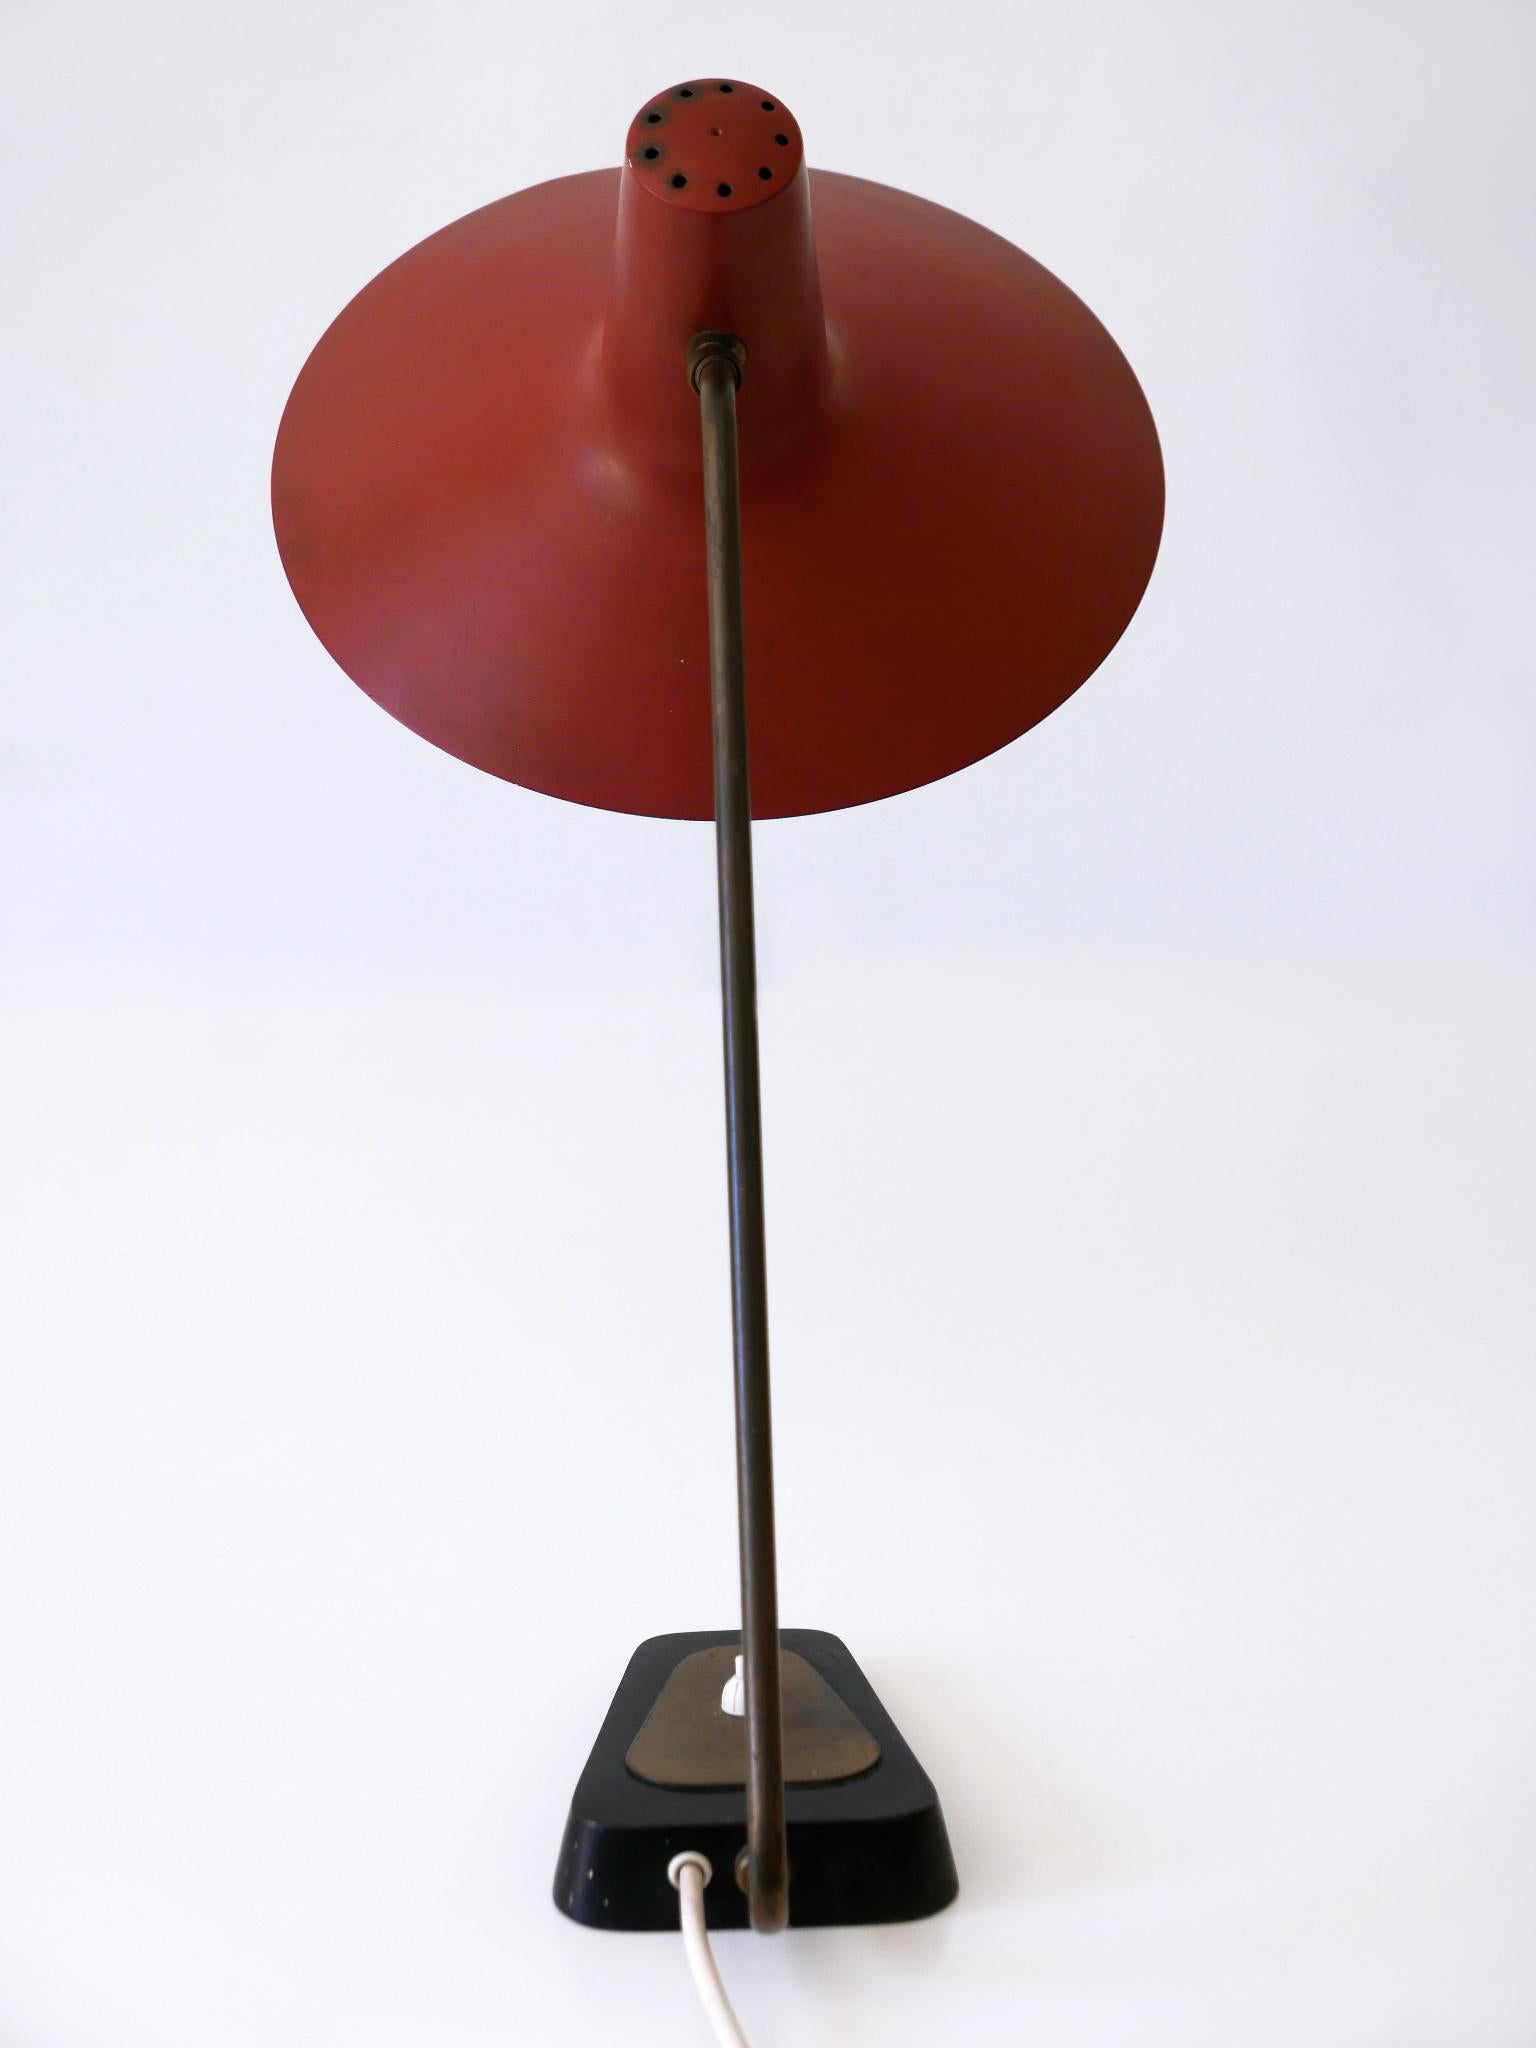 Exceptional Mid-Century Modern Table Lamp by Gebrüder Cosack Germany 1950s For Sale 14